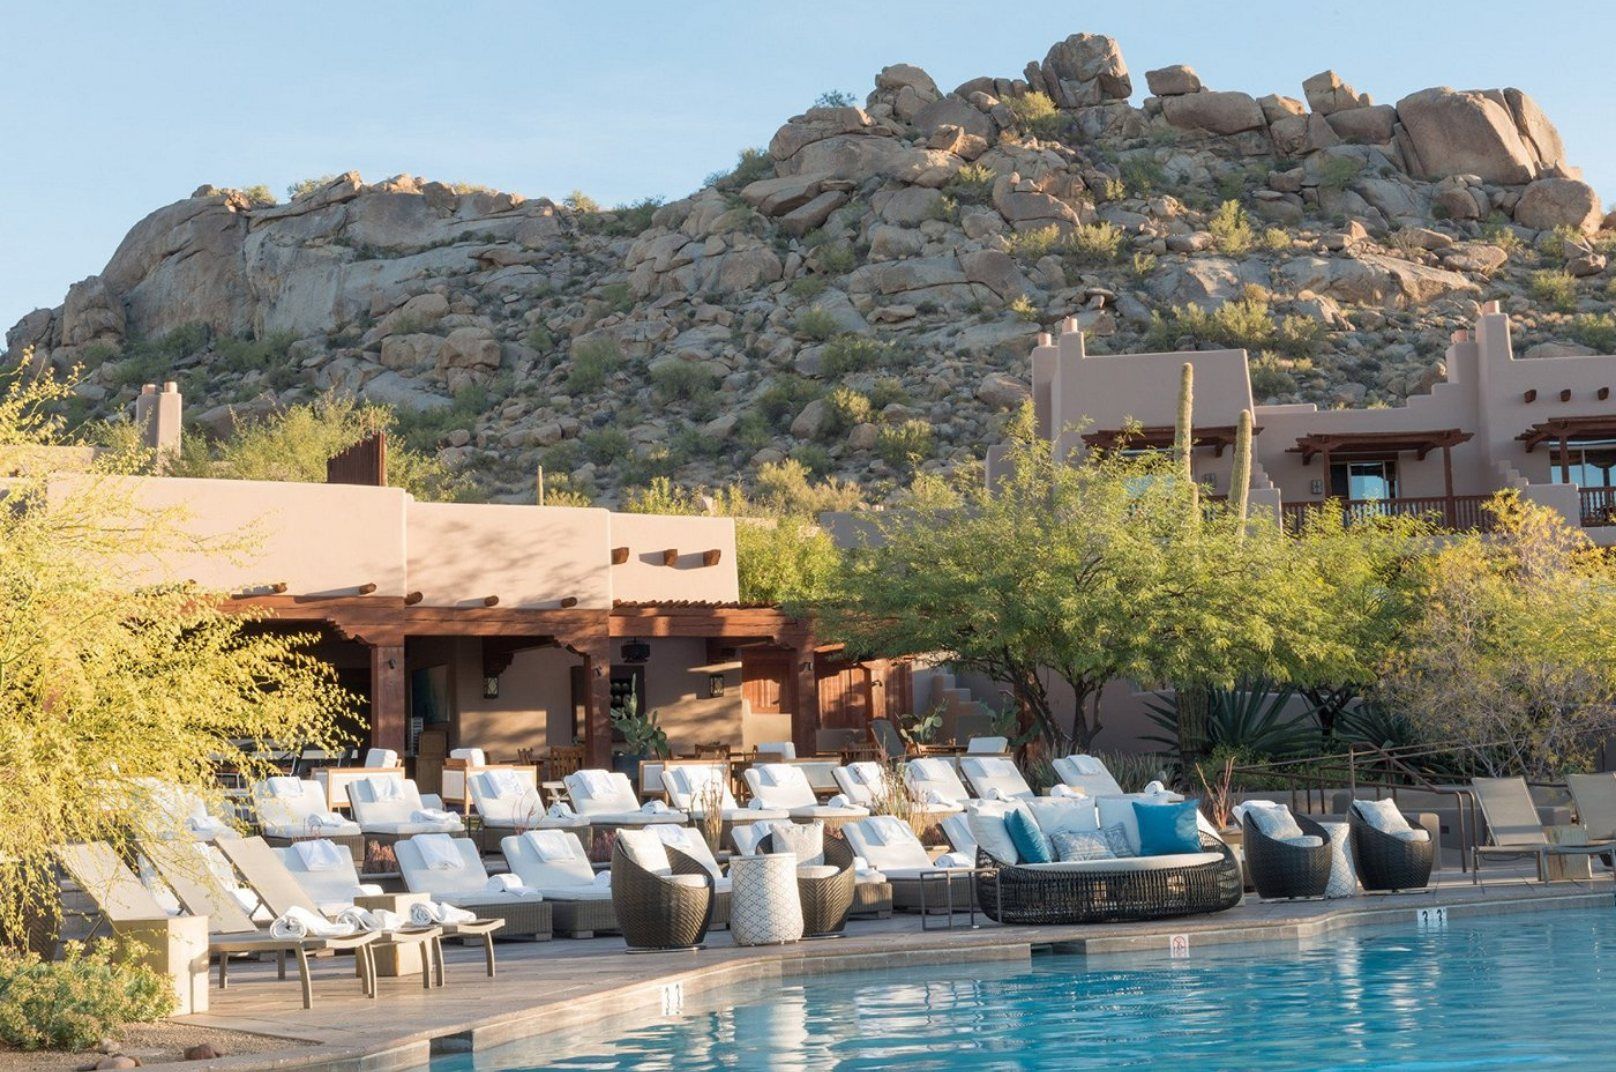 The best hotels in Scottsdale and Phoenix